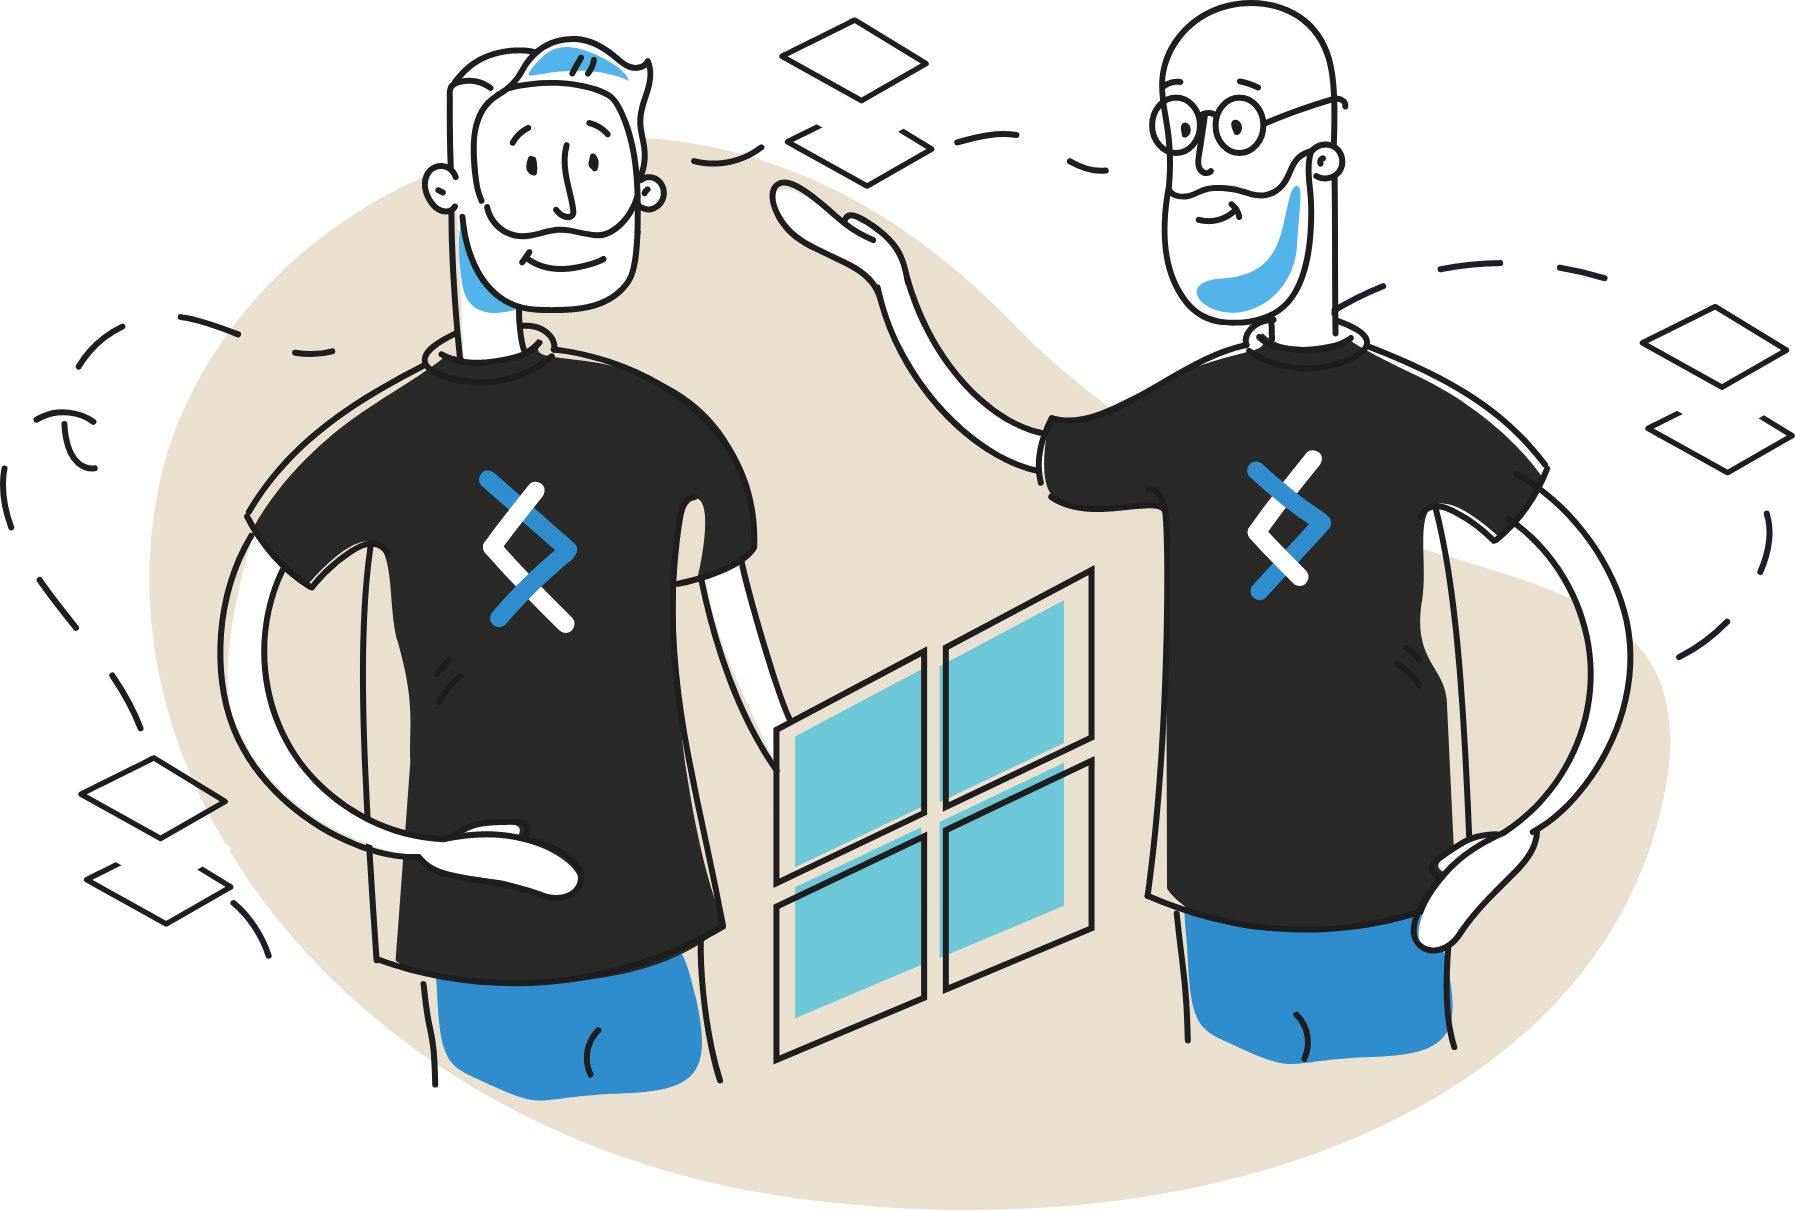 Illustration of DNX characters holding windows app modernisation icons